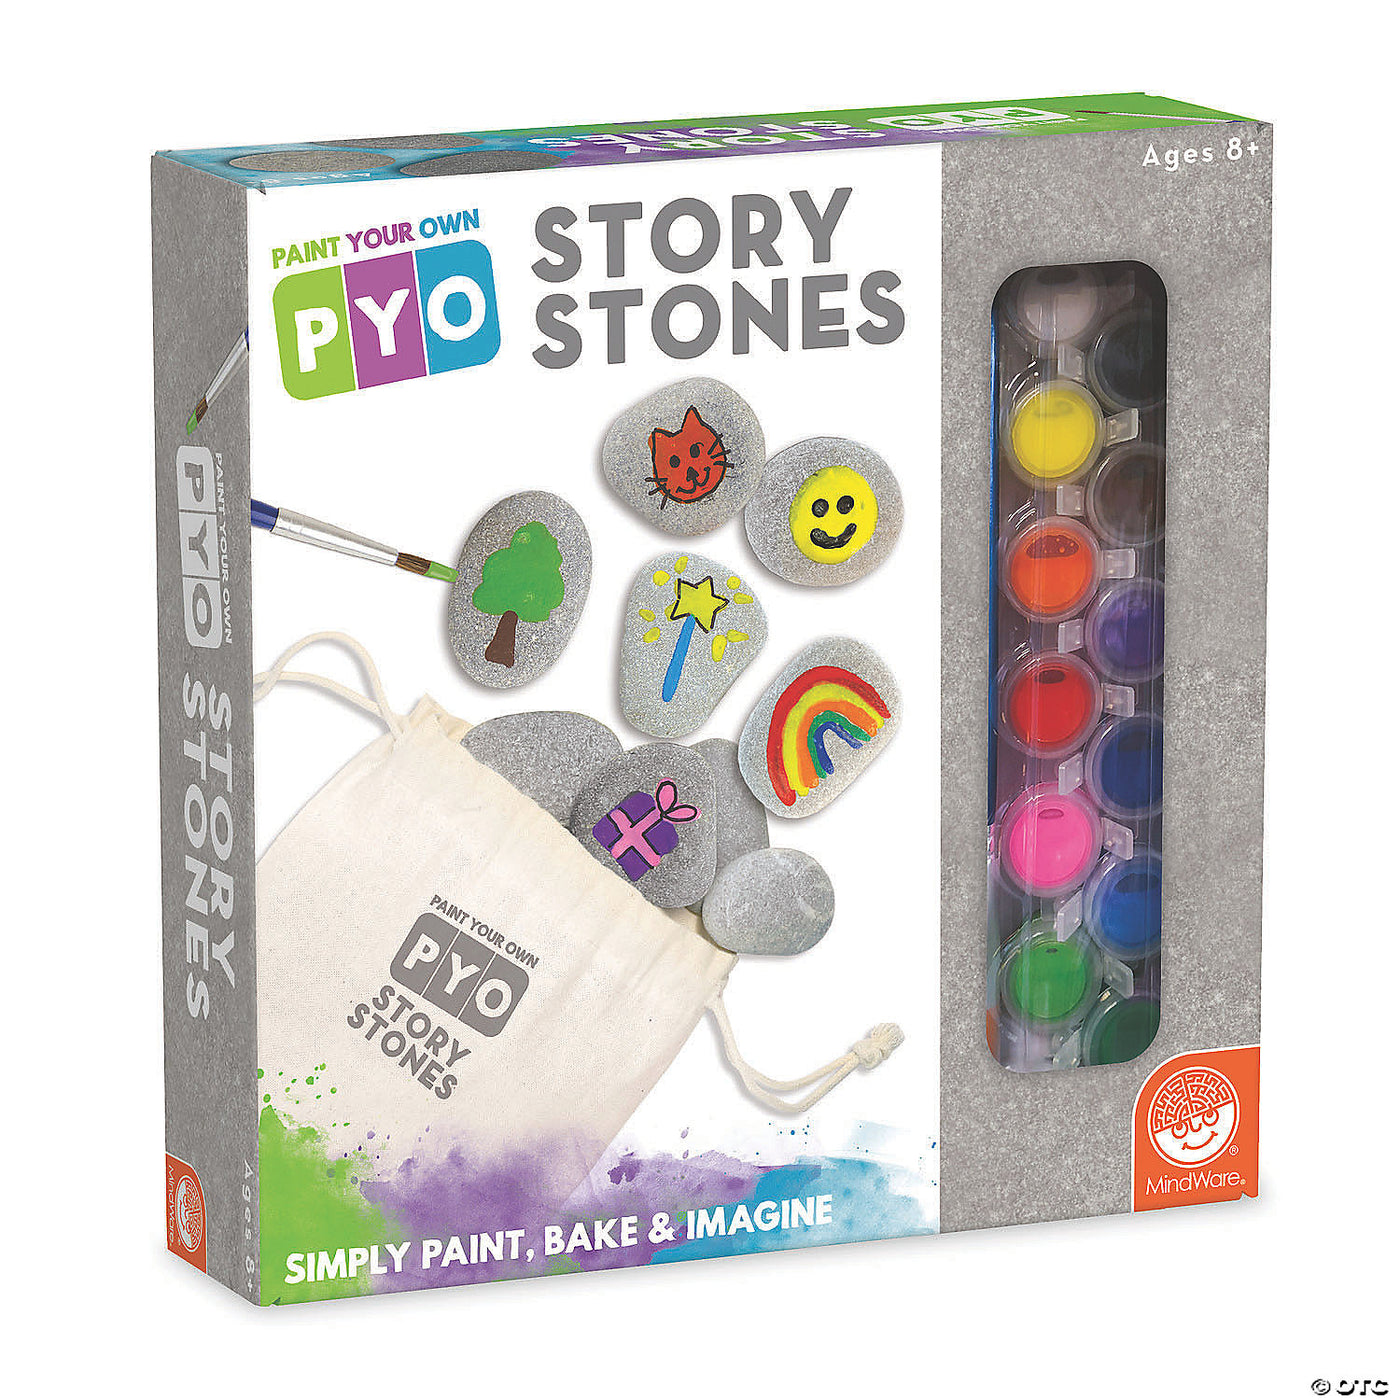 Paint Your Own Story Stones- Ages 8+!